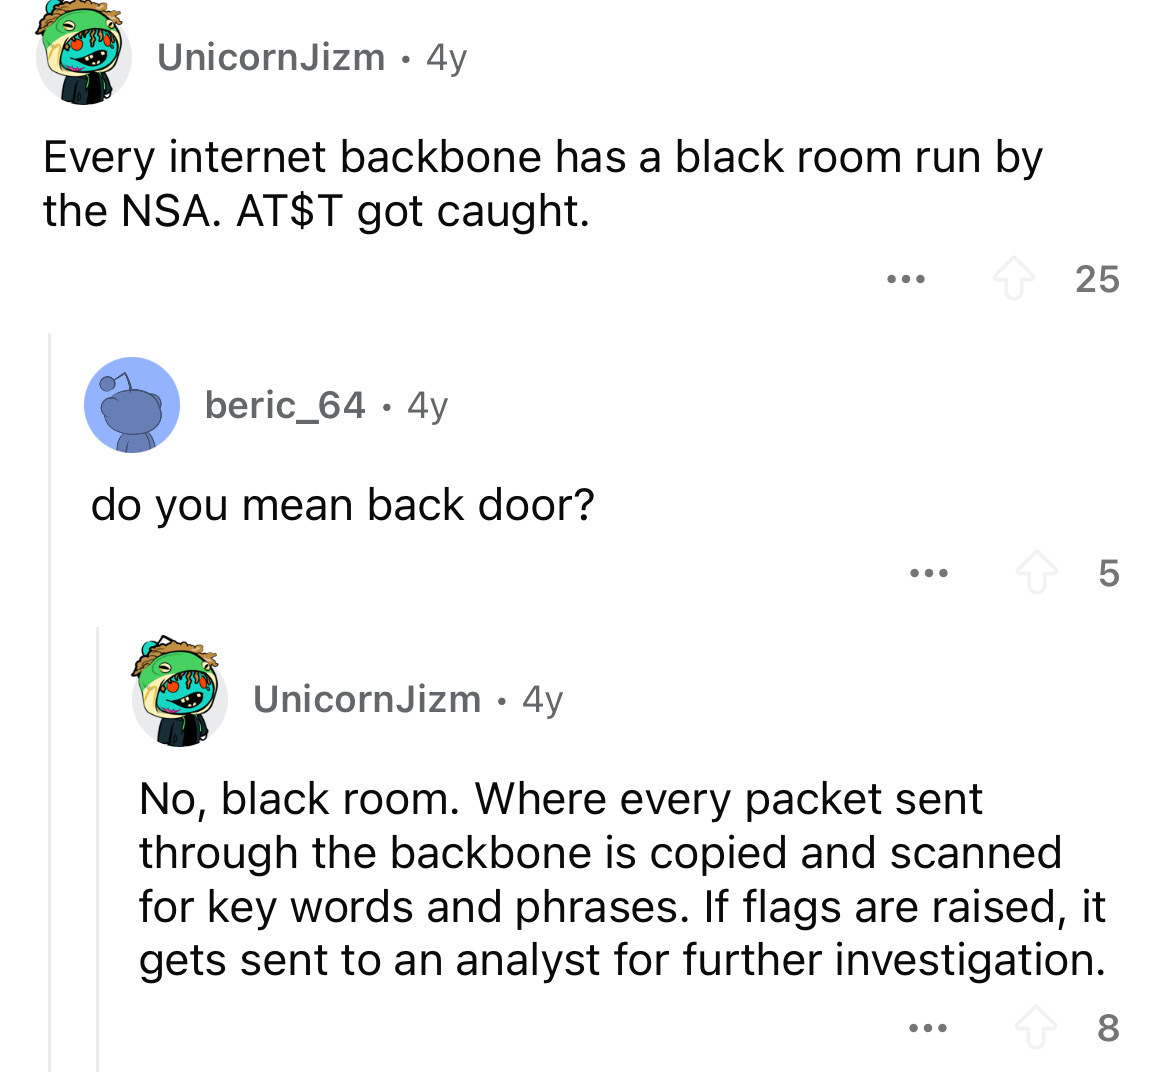 screenshot - UnicornJizm 4y . Every internet backbone has a black room run by the Nsa. At$T got caught. beric_64.4y do you mean back door? ... 25 5 UnicornJizm 4y No, black room. Where every packet sent through the backbone is copied and scanned for key w